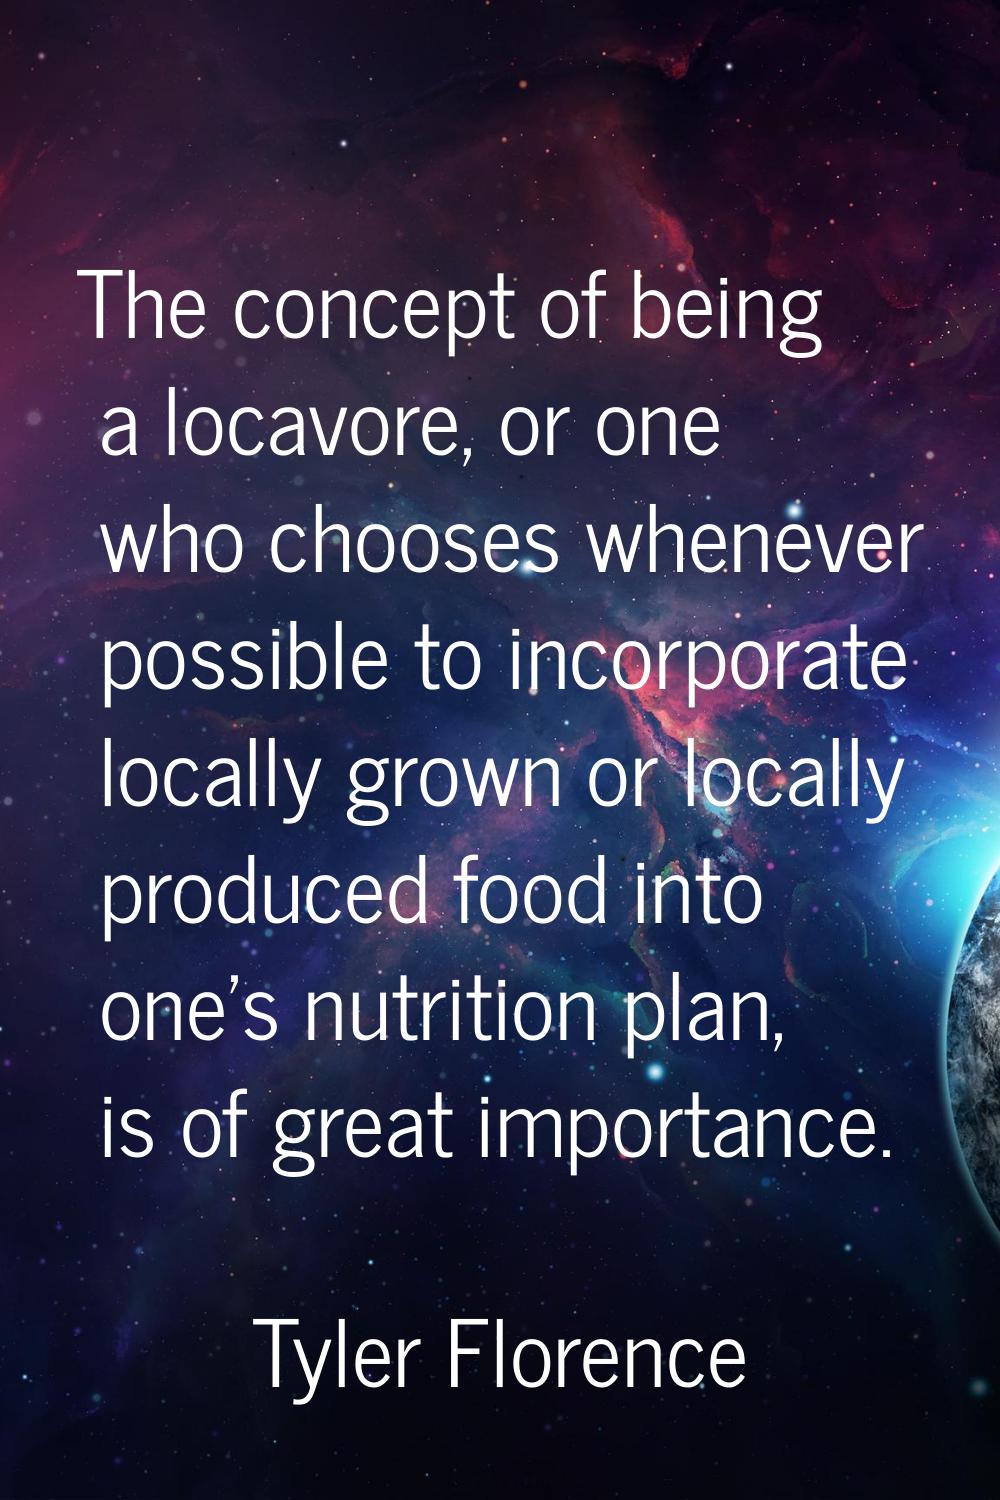 The concept of being a locavore, or one who chooses whenever possible to incorporate locally grown 